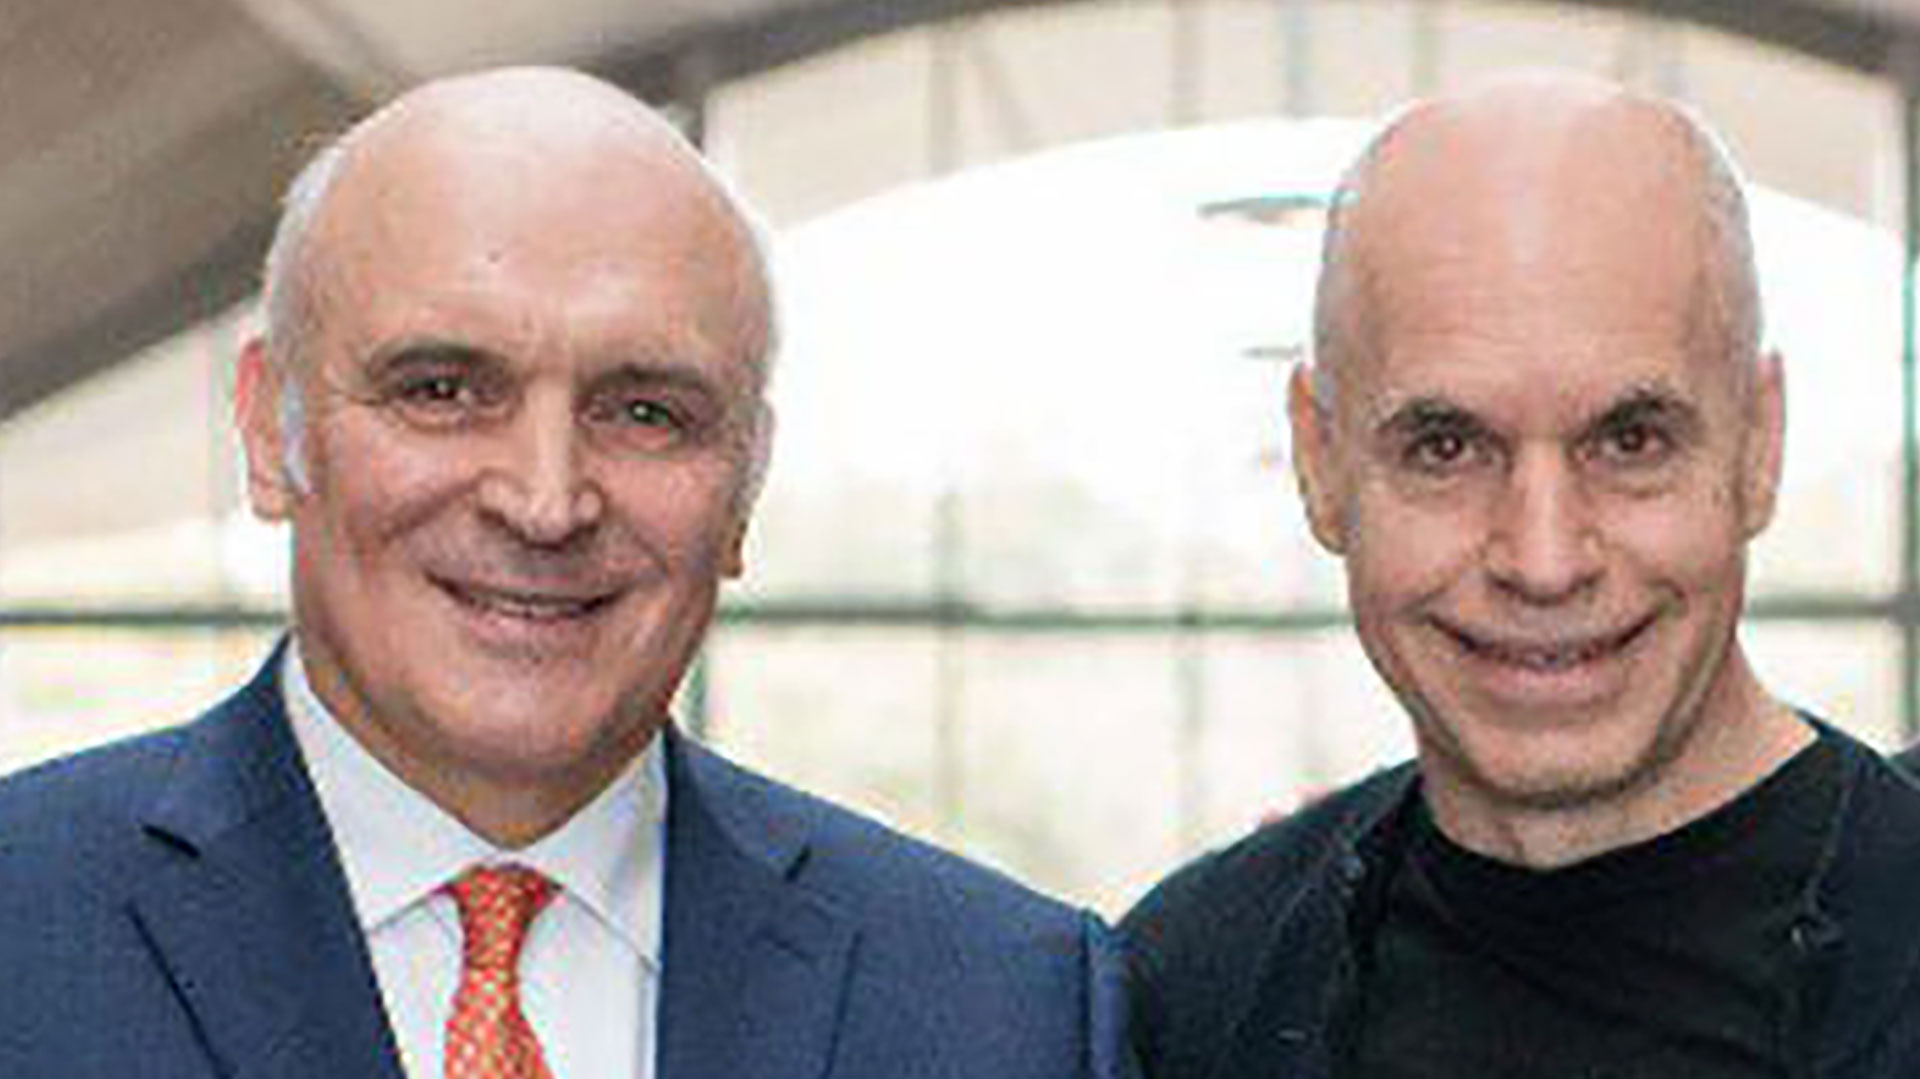 Espert together with Horacio Rodríguez Larreta, who promoted his entry into Together for Change, but also wants to add Schiaretti.  According to Espert, on the other hand, now is not the time